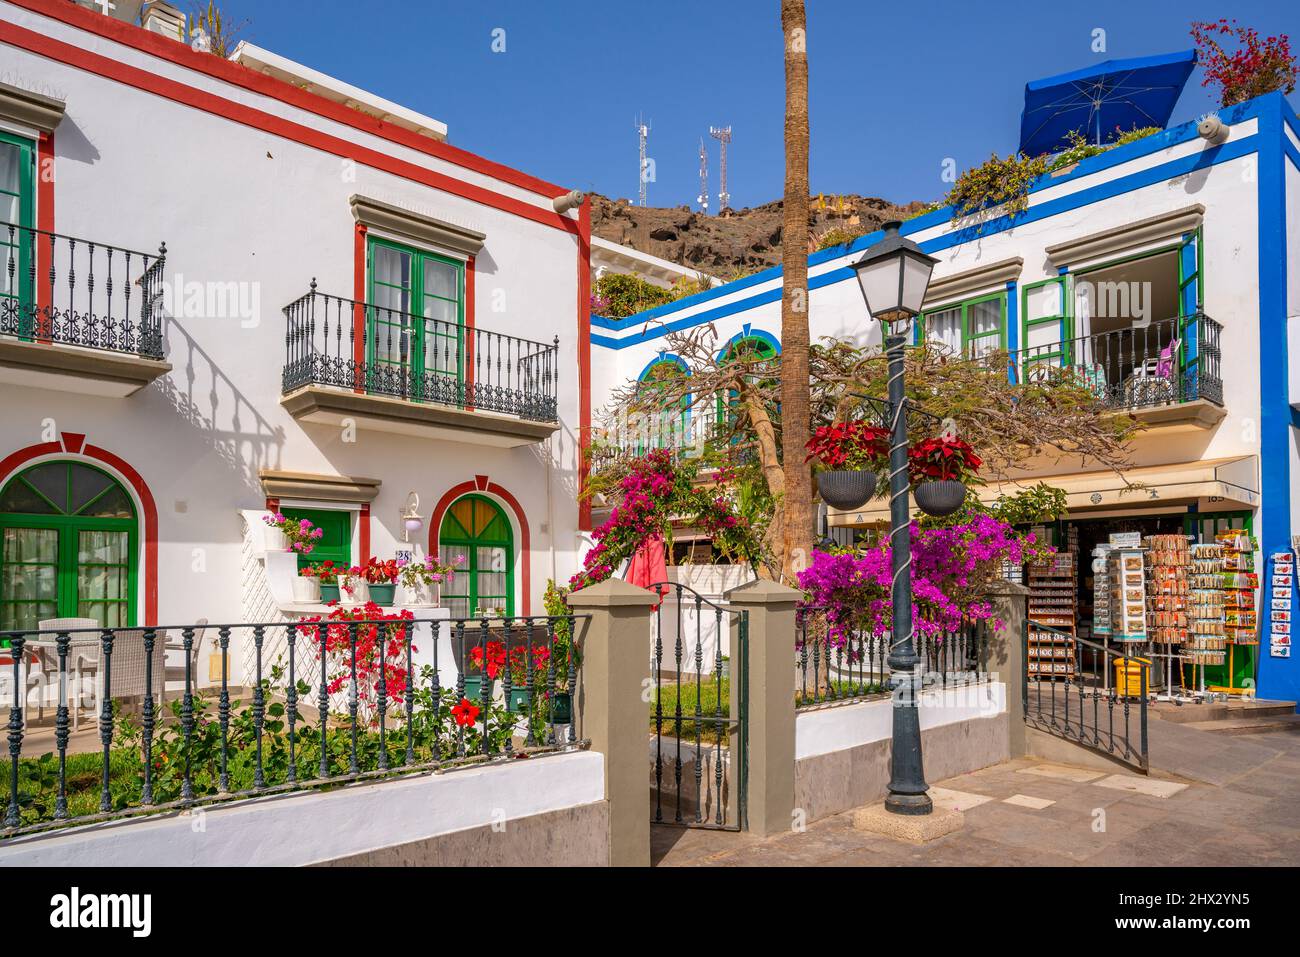 View of colourful buildings and flowers in the old town, Puerto de Mogan, Gran Canaria, Canary Islands, Spain, Europe Stock Photo